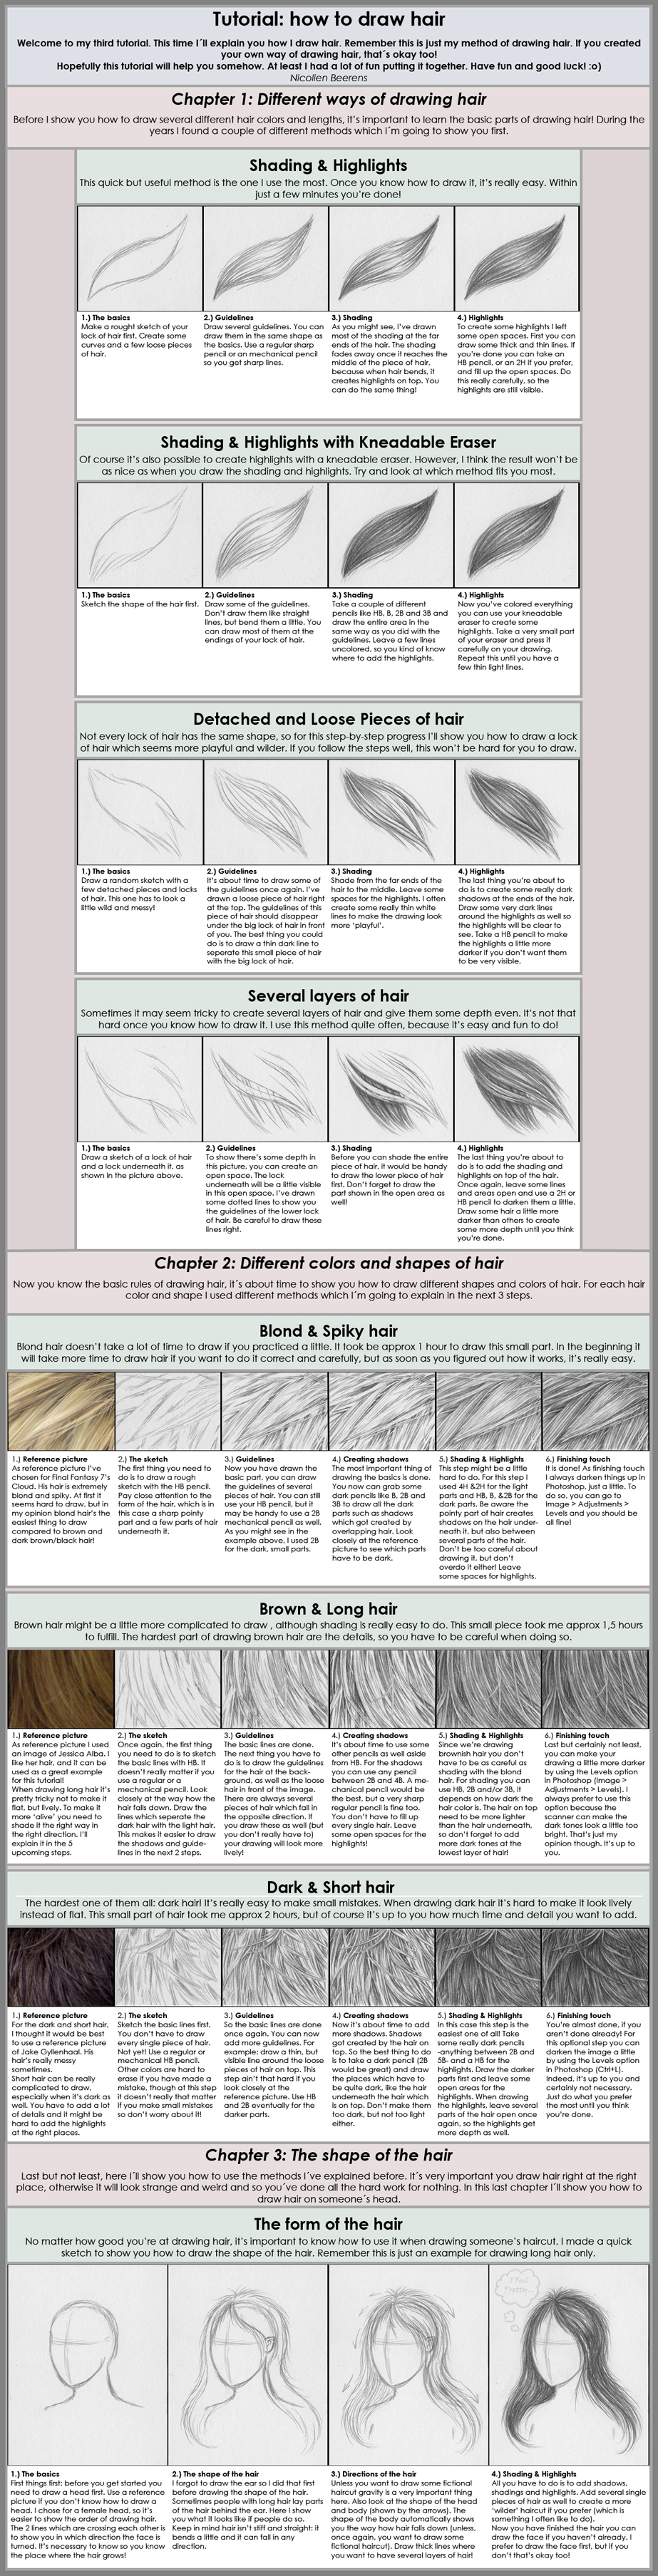 Tutorial: How to draw hair